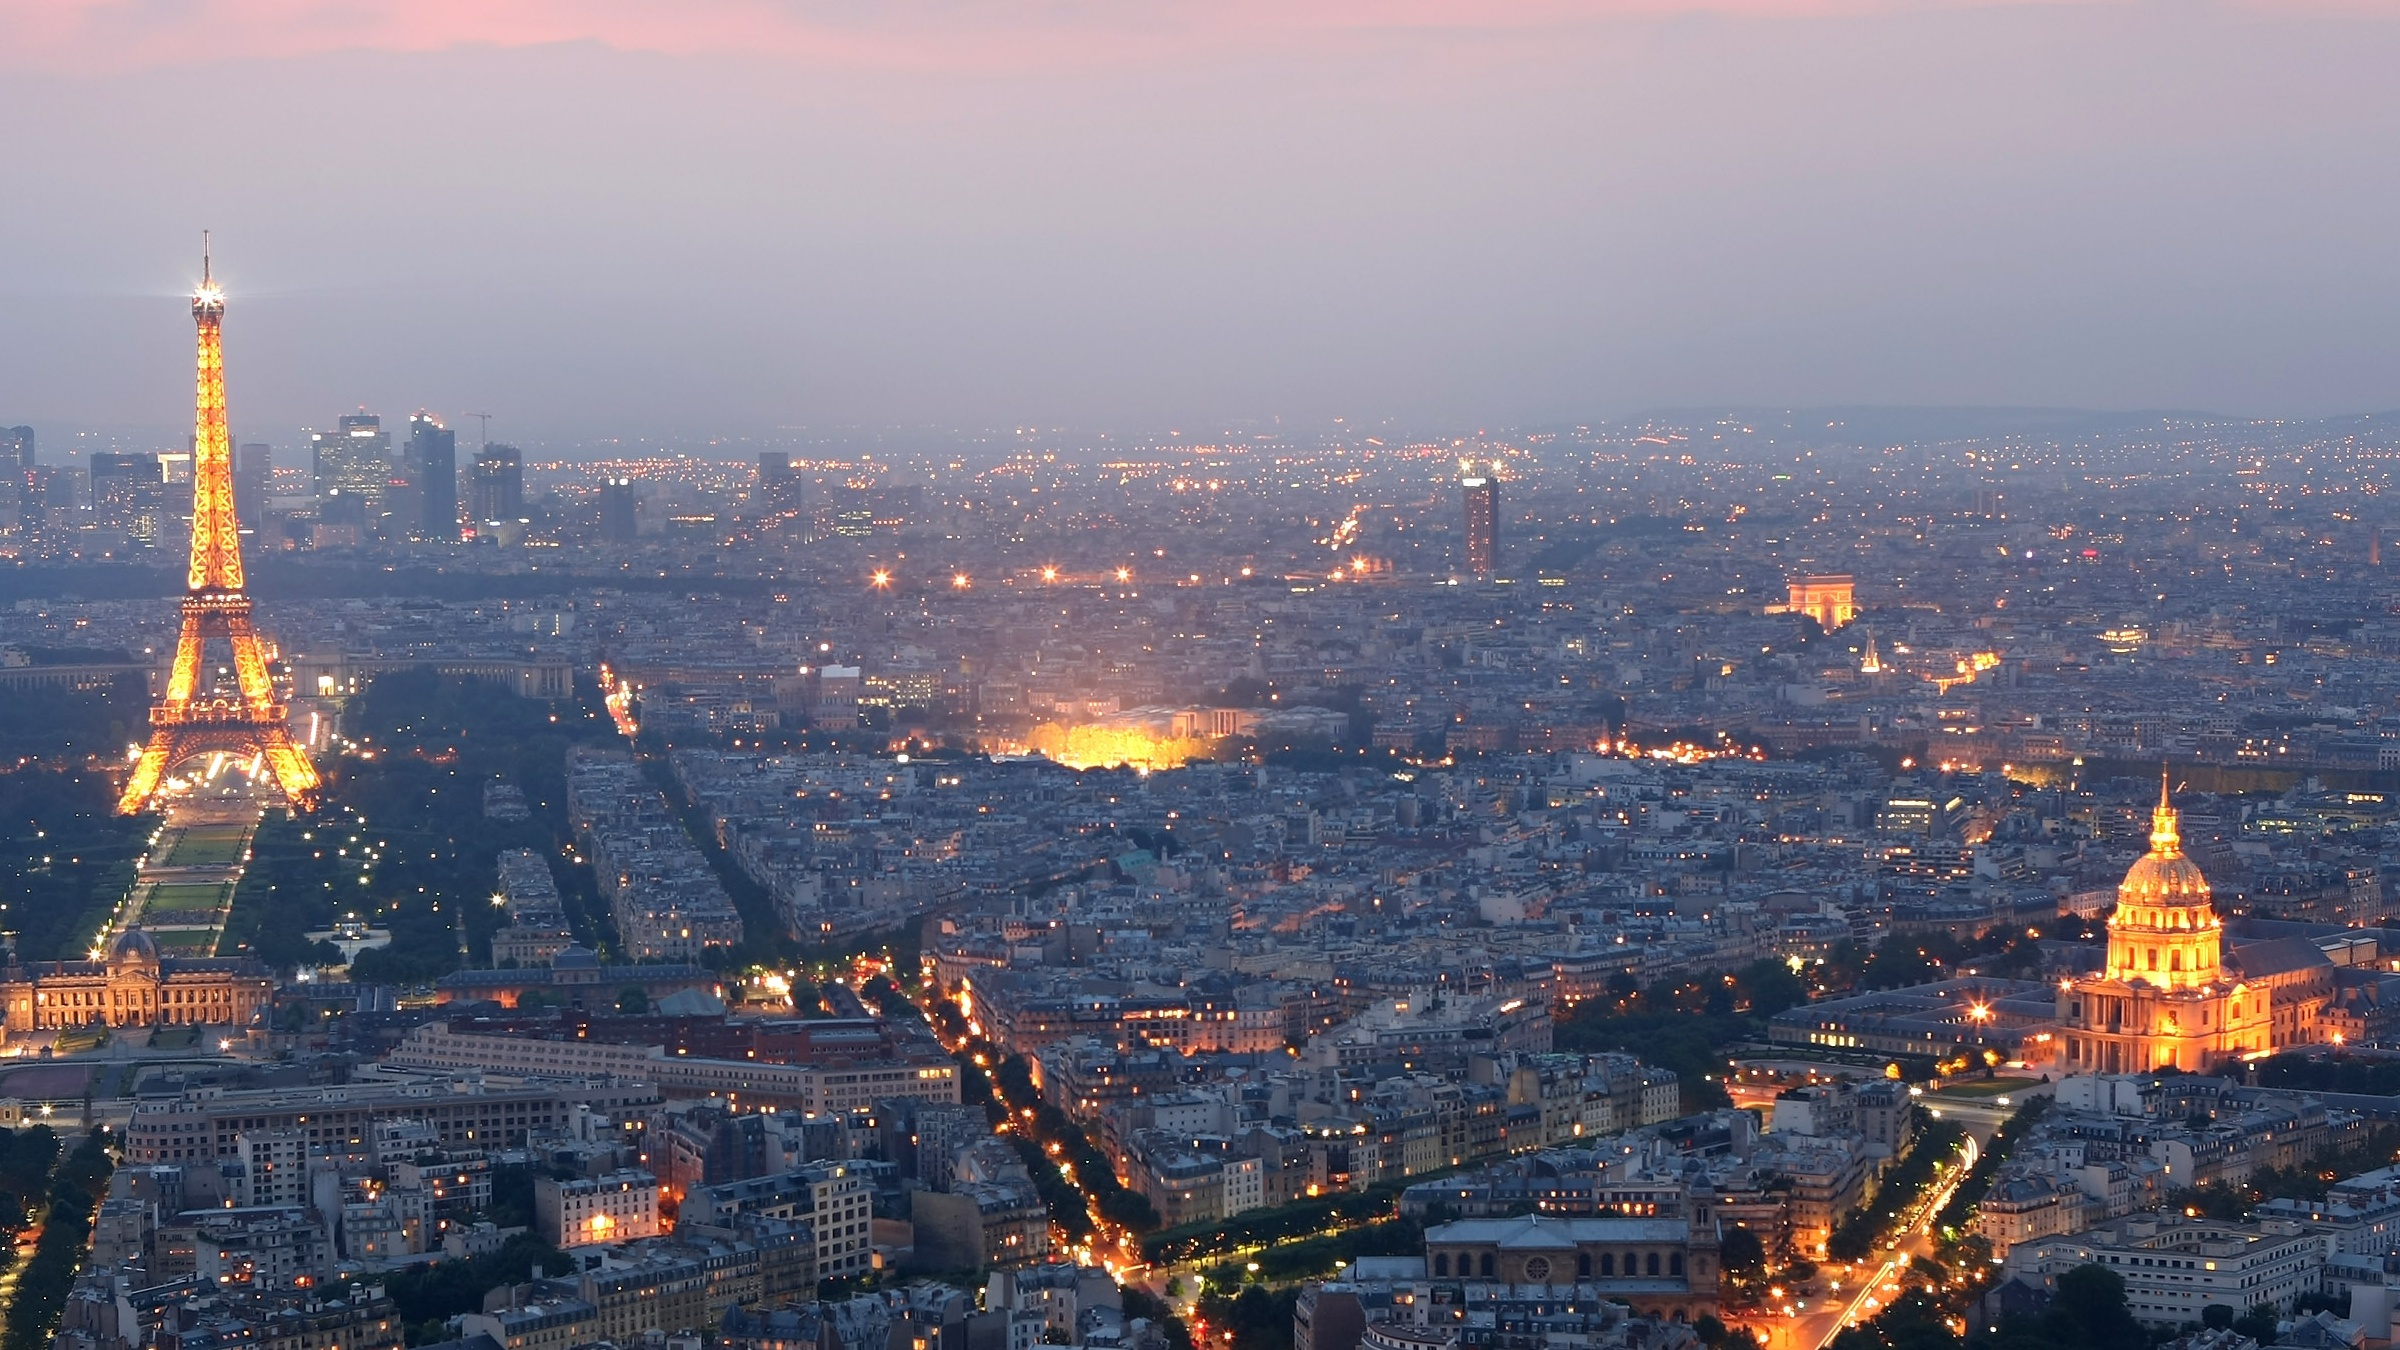 Paris pictured from above at dusk